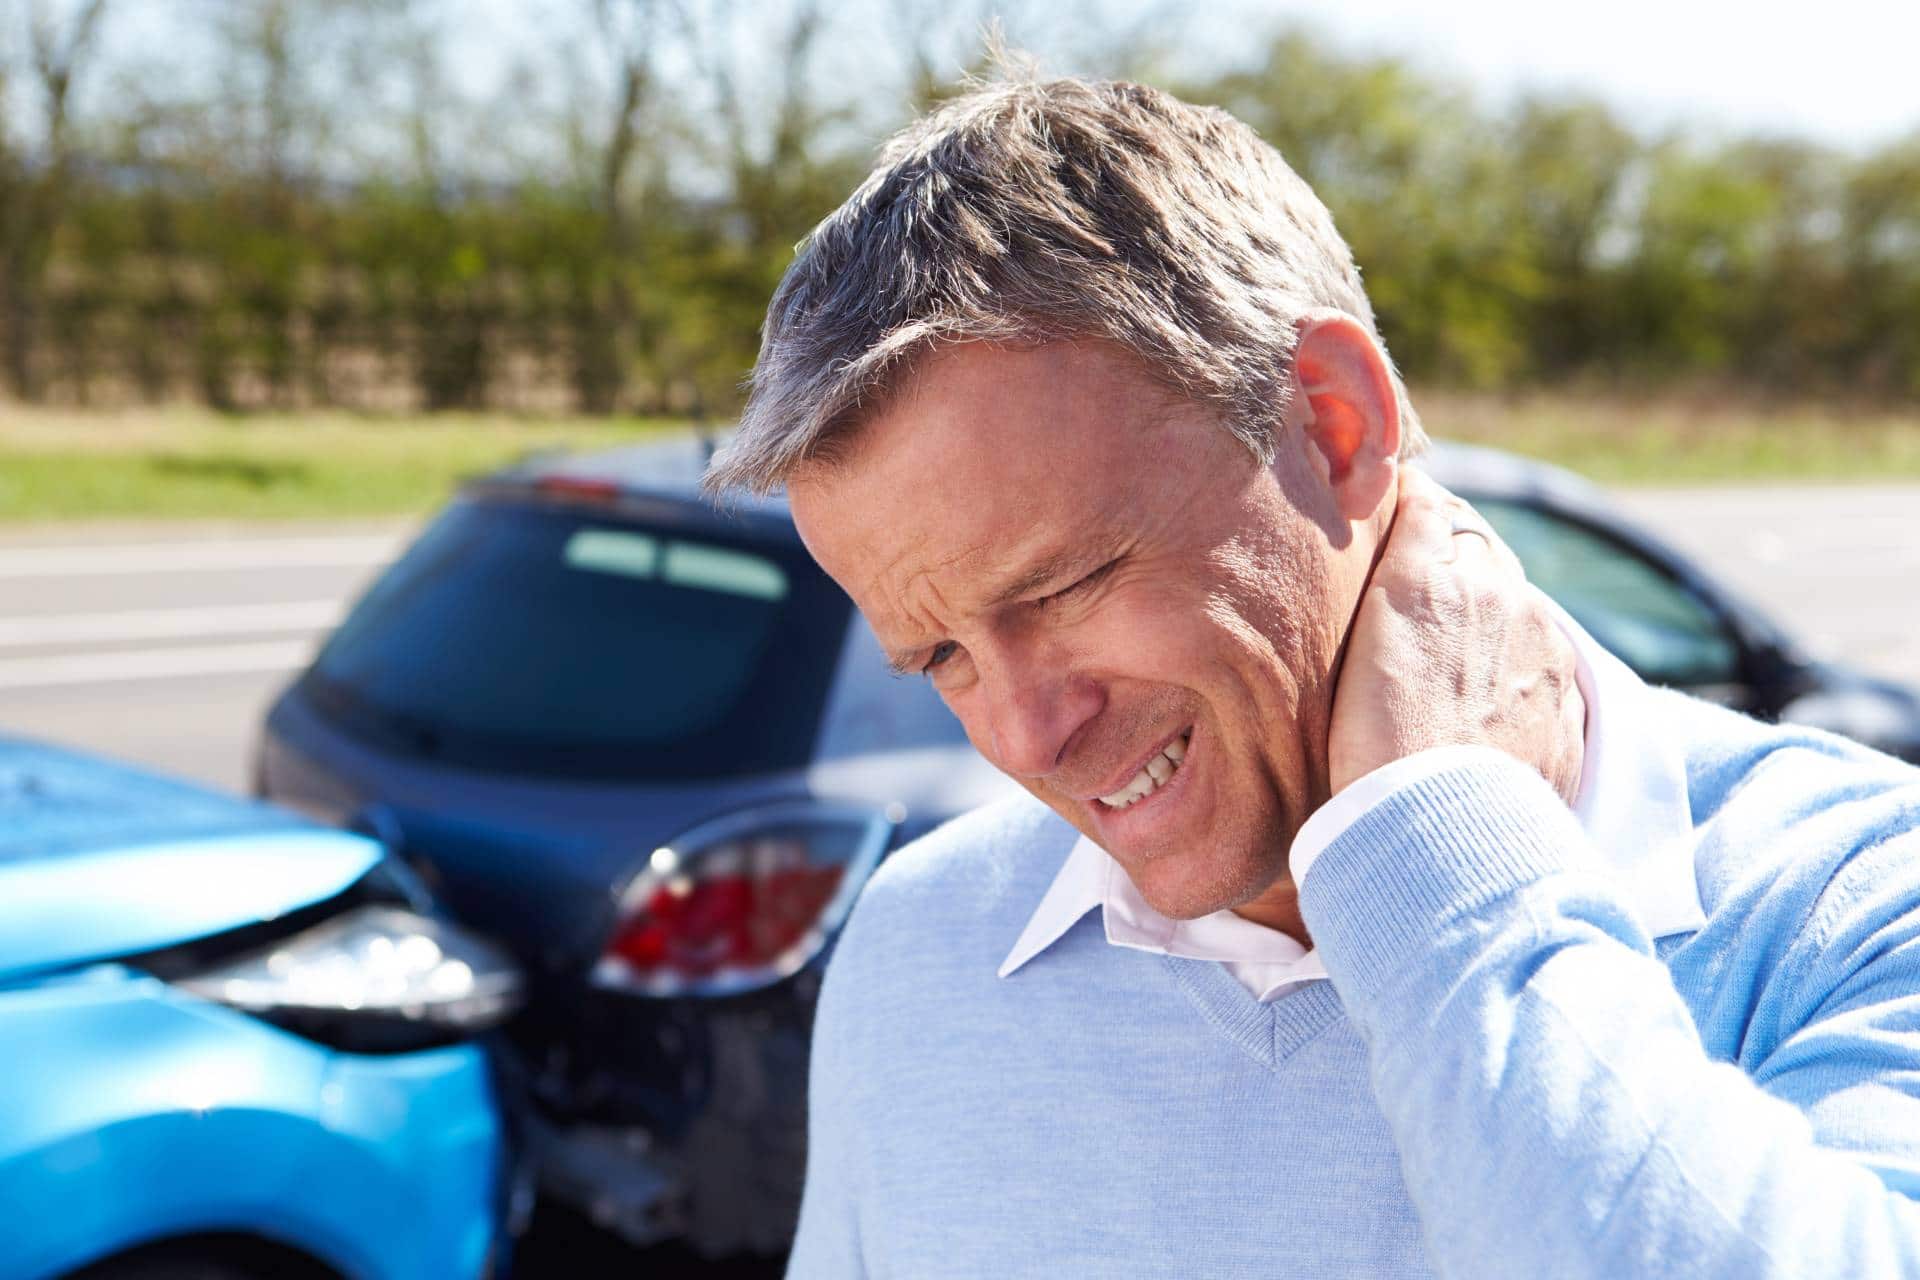 Hurt in a car accident? Schedule a free consultation with our personal injury lawyers at The Angell Law Firm.